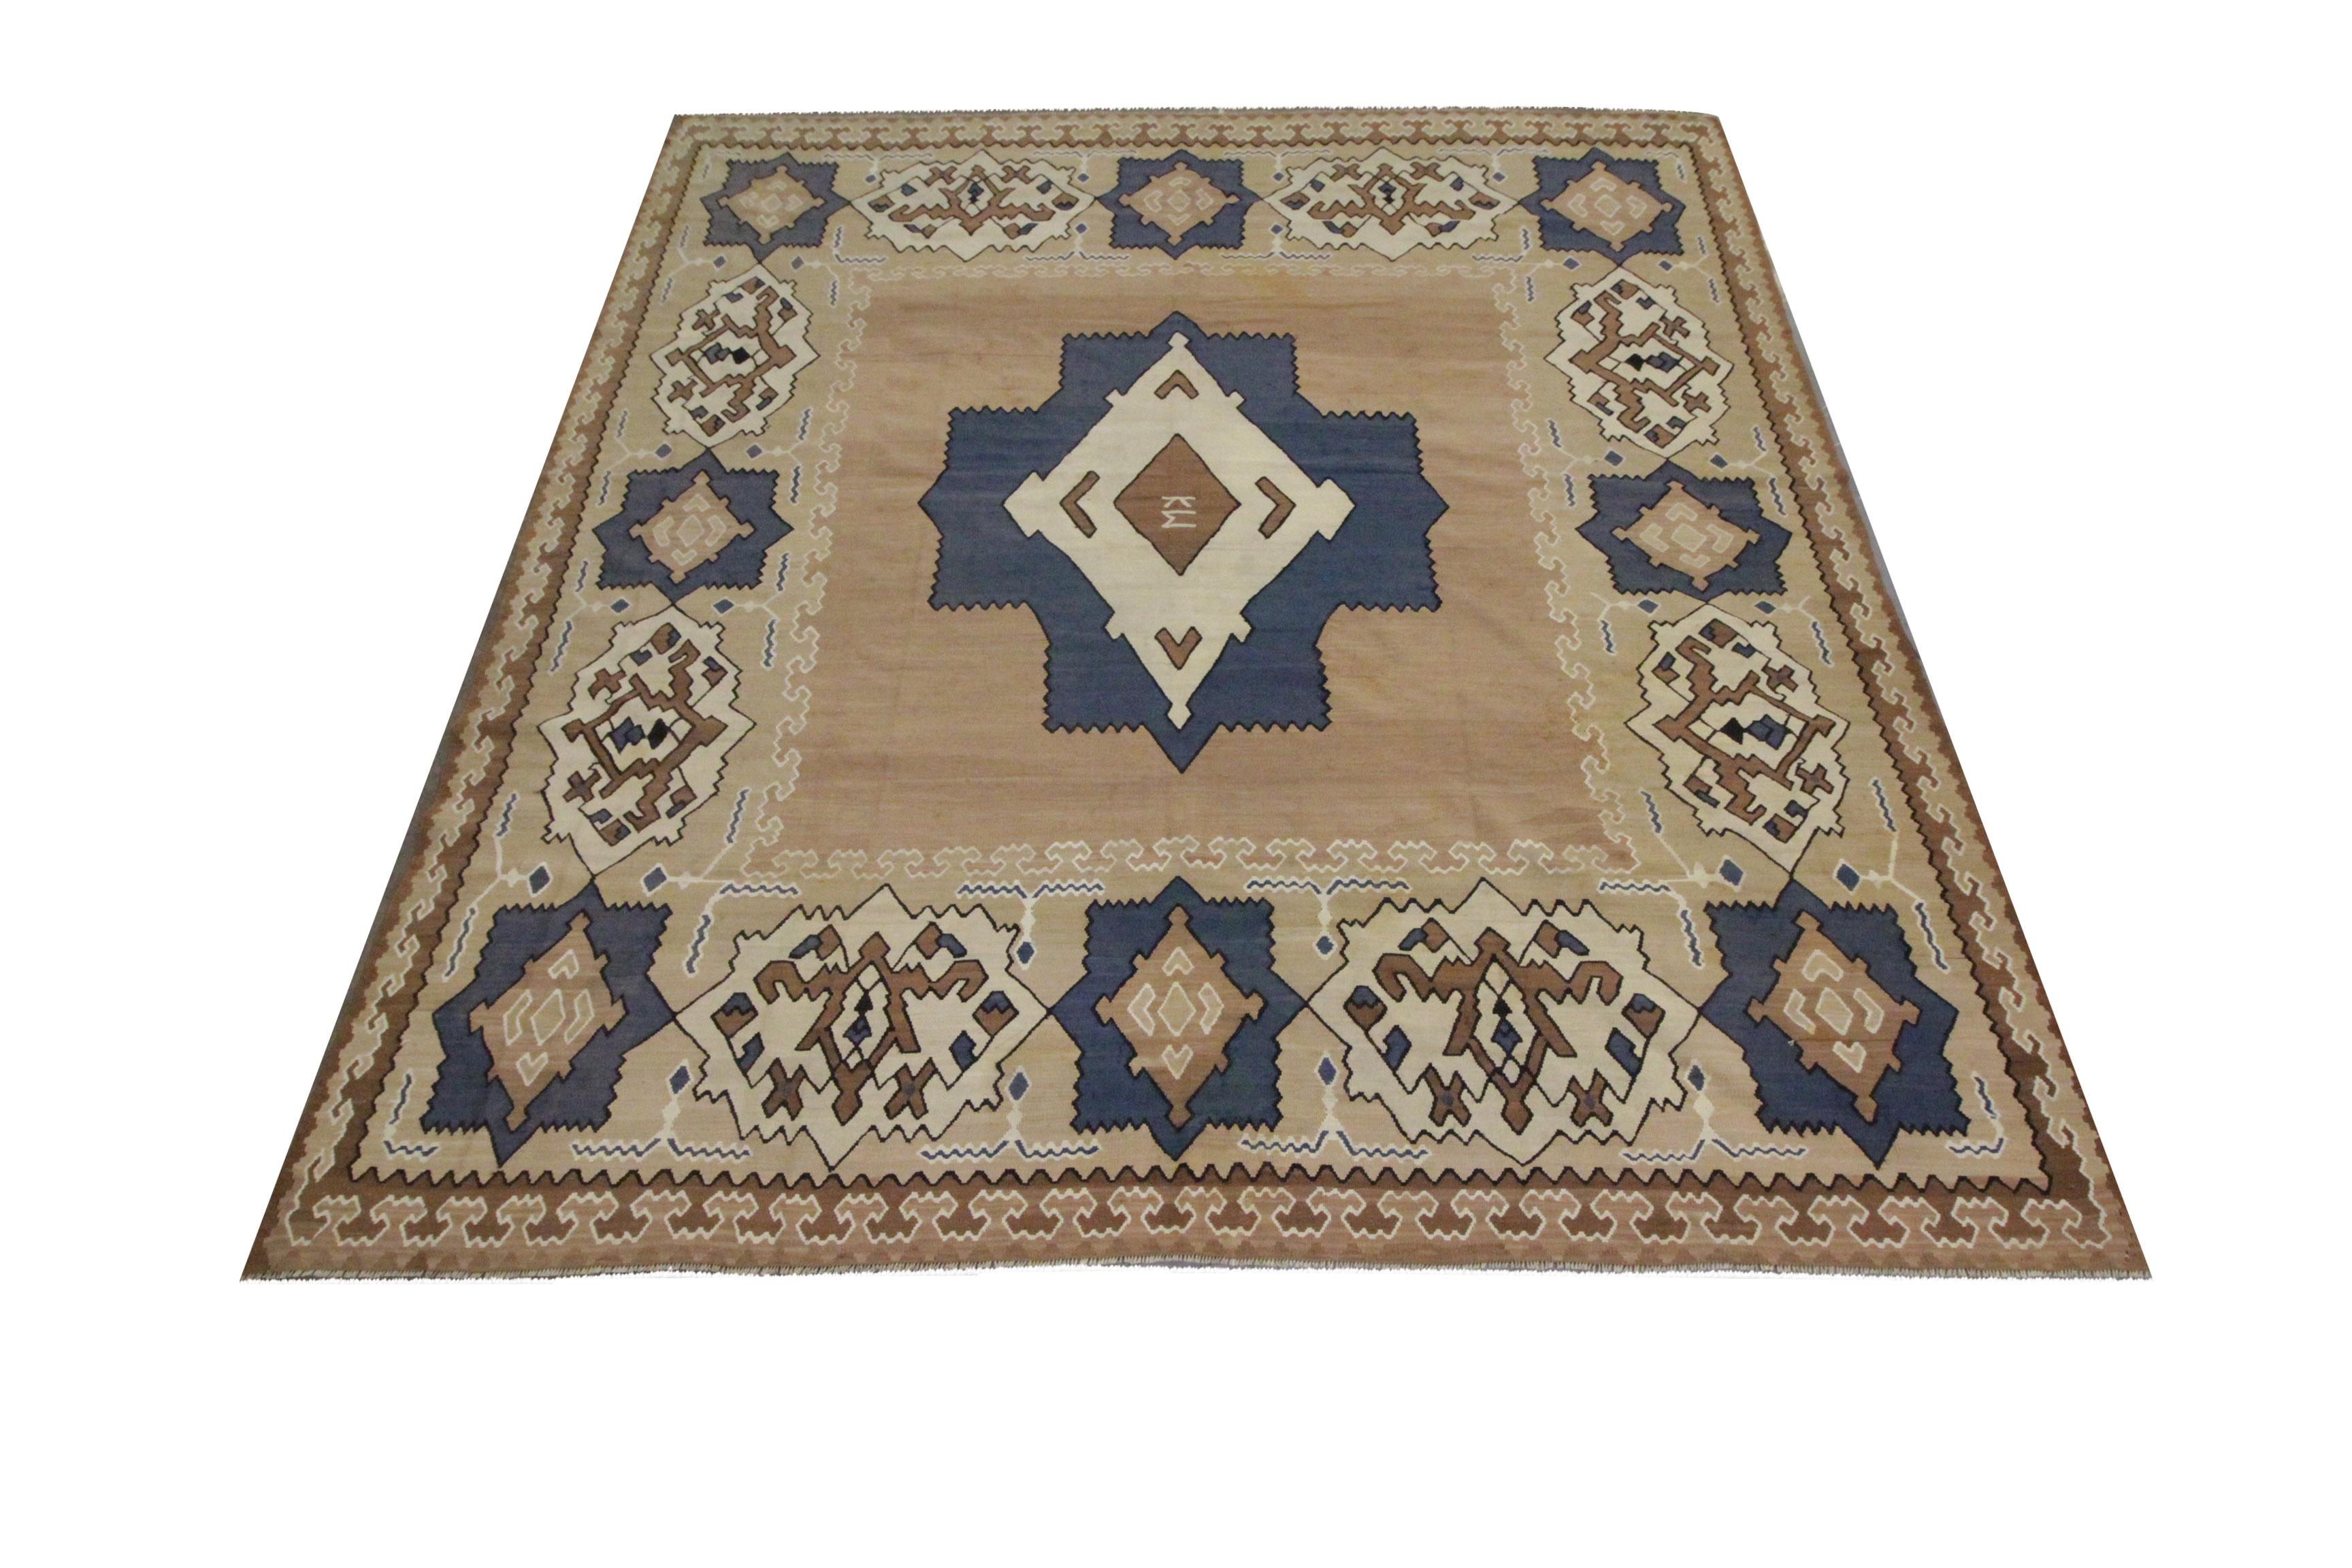 This beautiful handmade kilim is a vintage Serbian, Pirot rug woven in the 1950s. The design features a simple beige and cream background with a large geometric central medallion. This has then been enclosed by a bold repeating pattern border. Both